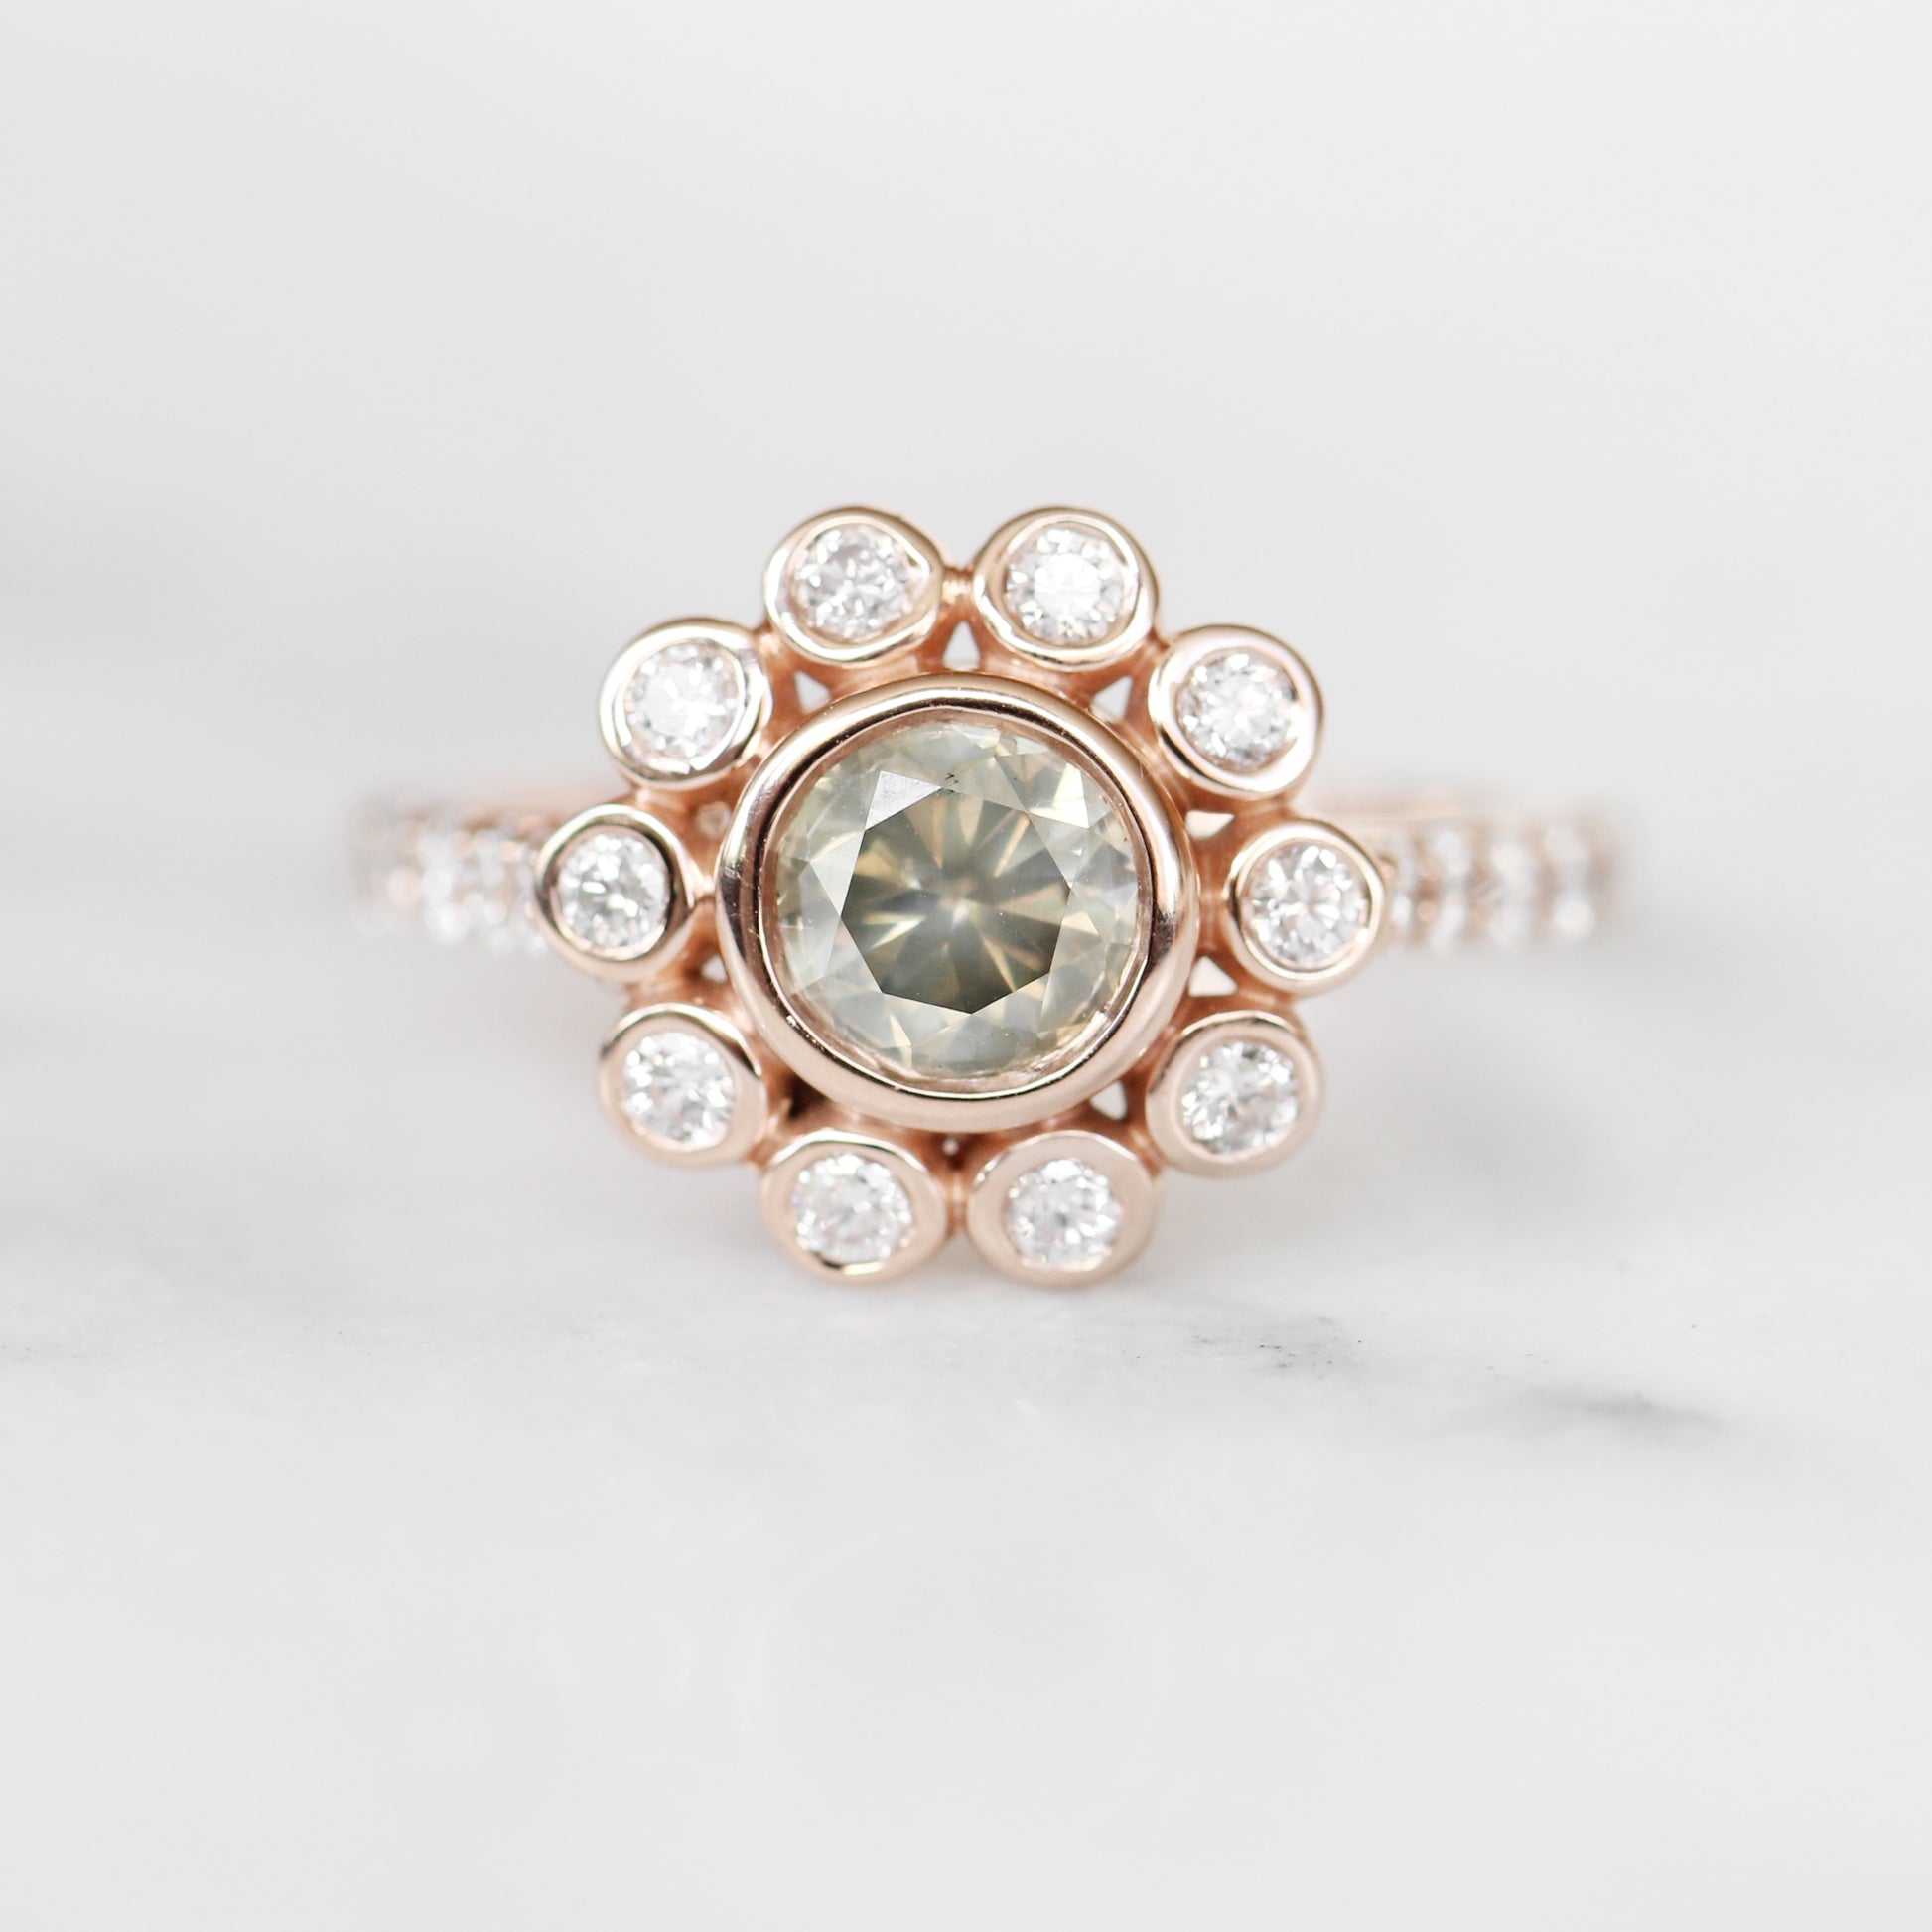 Minnie Antique Style bezel ring with a 1.02 carat certified diamond in 10k rose gold - ready to size and ship - Midwinter Co. Alternative Bridal Rings and Modern Fine Jewelry